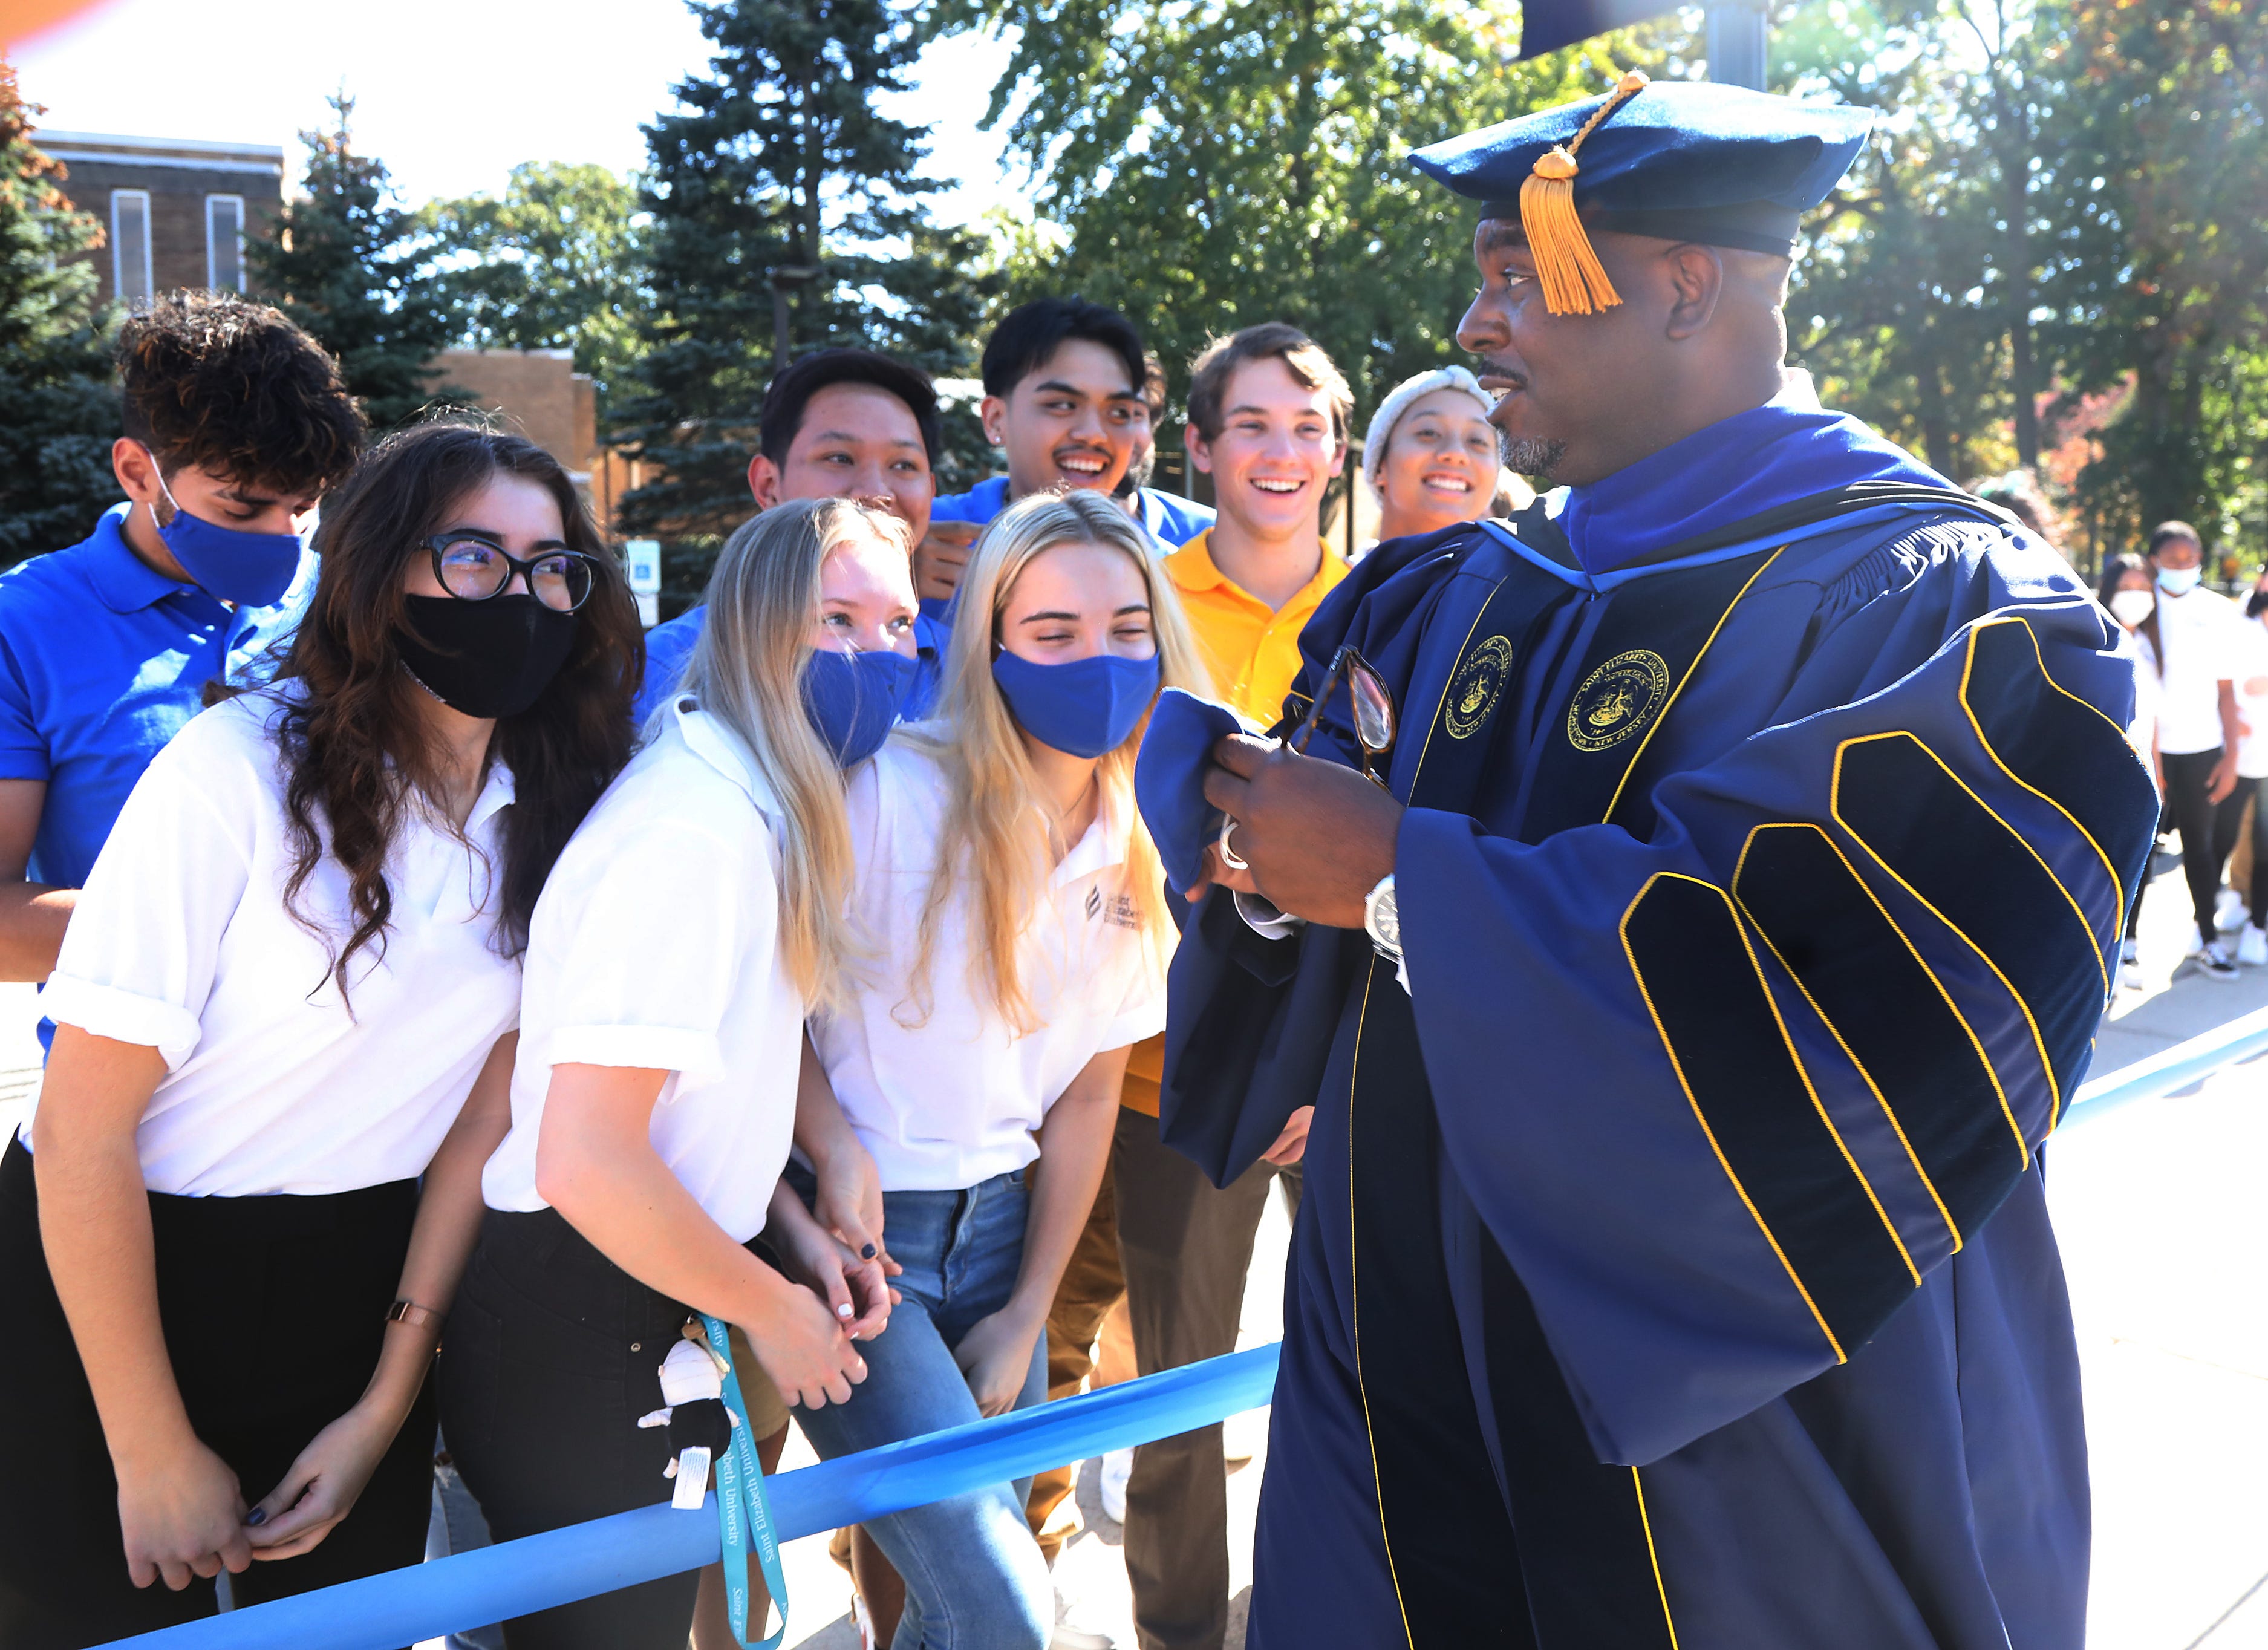 Dr. Gary Crosby with students during a procession ceremony to celebrate his installation as the first Black president of Saint Elizabeth University in Morristown on October 21, 2021.